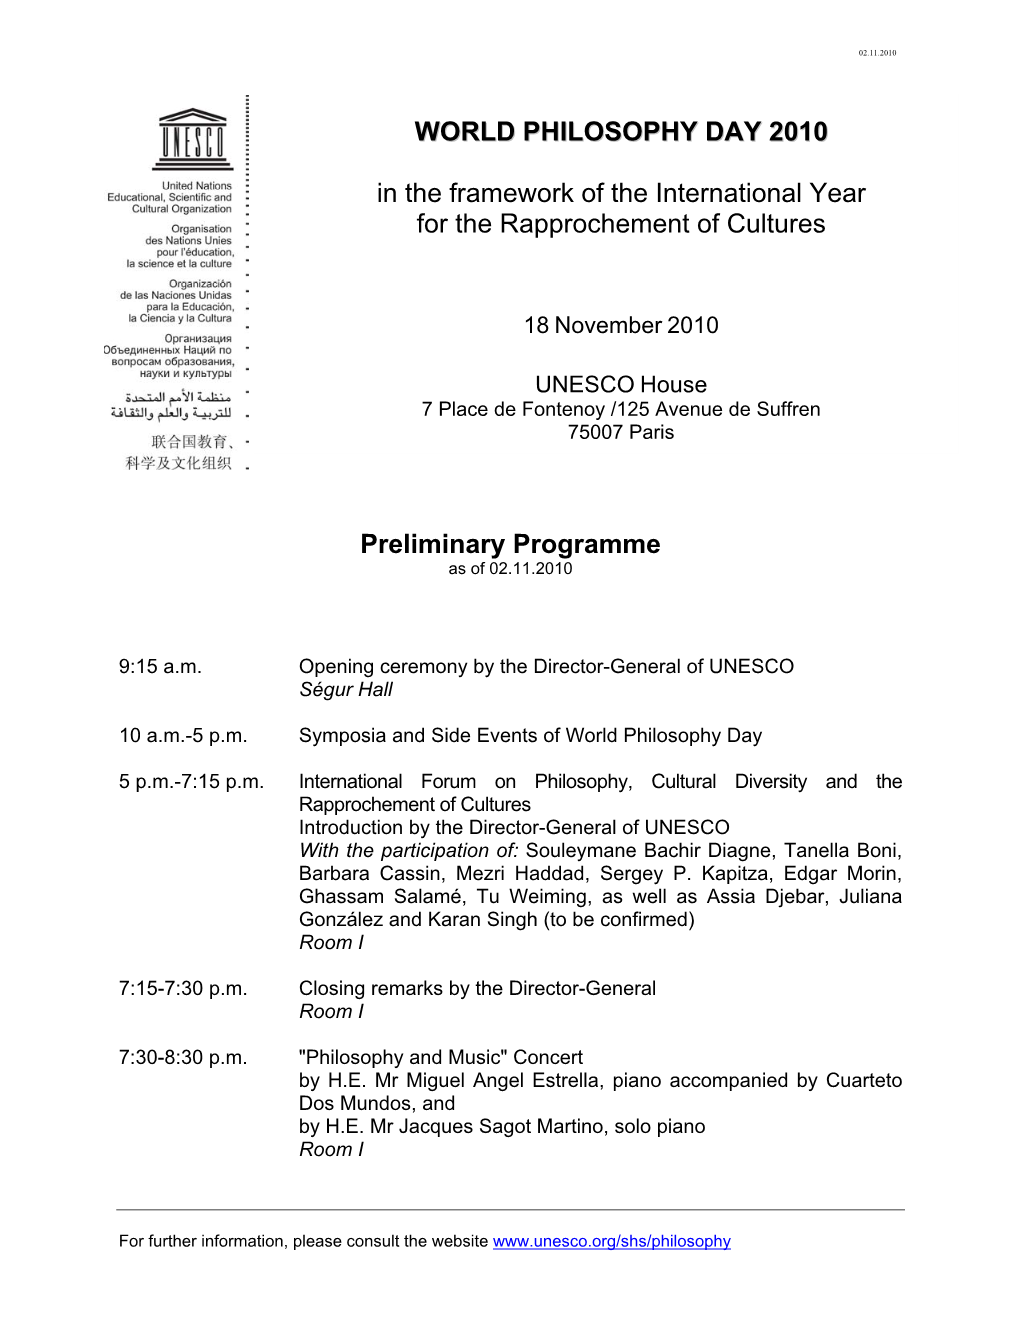 Preliminary Programme WORLD PHILOSOPHY DAY 2010 in The